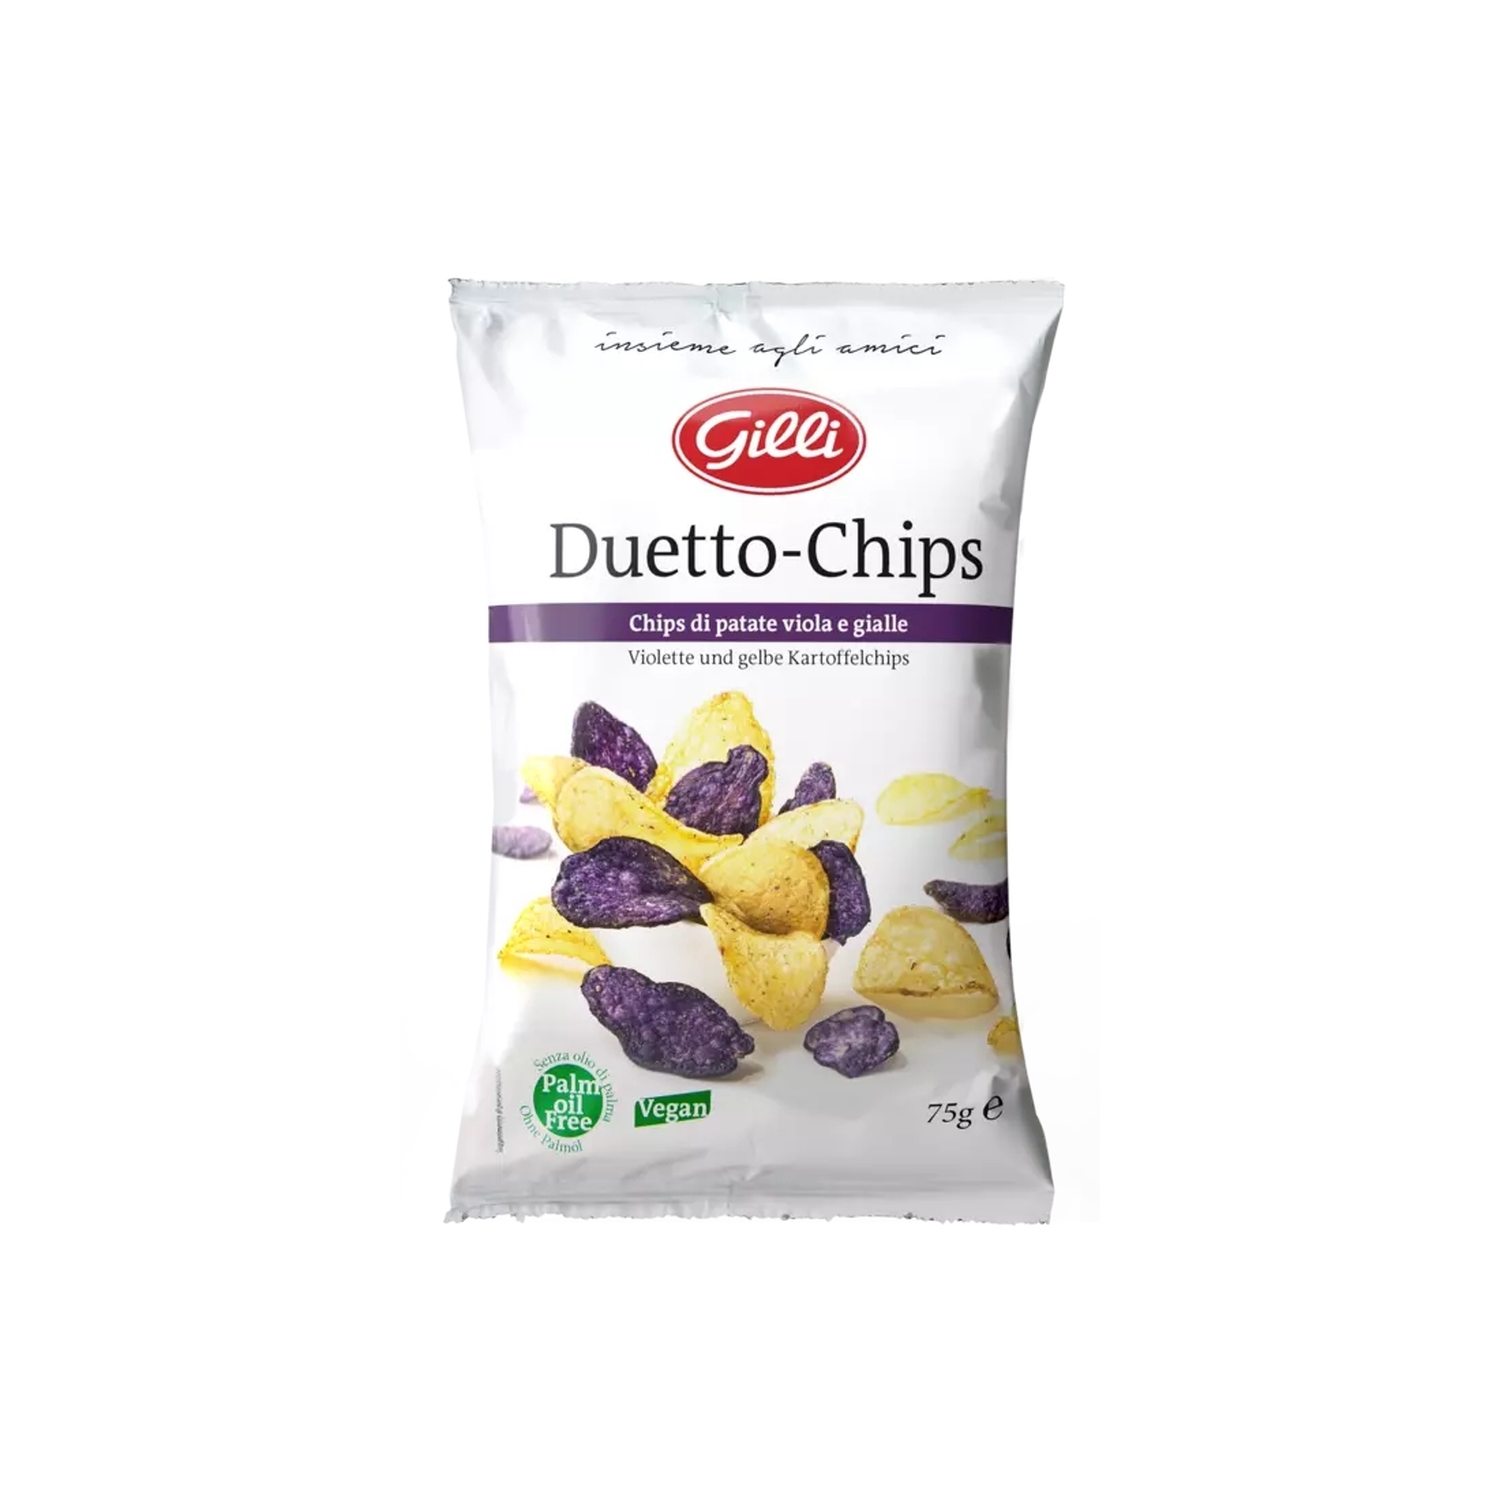 Duetto-Chips 75 gr. - Gilli